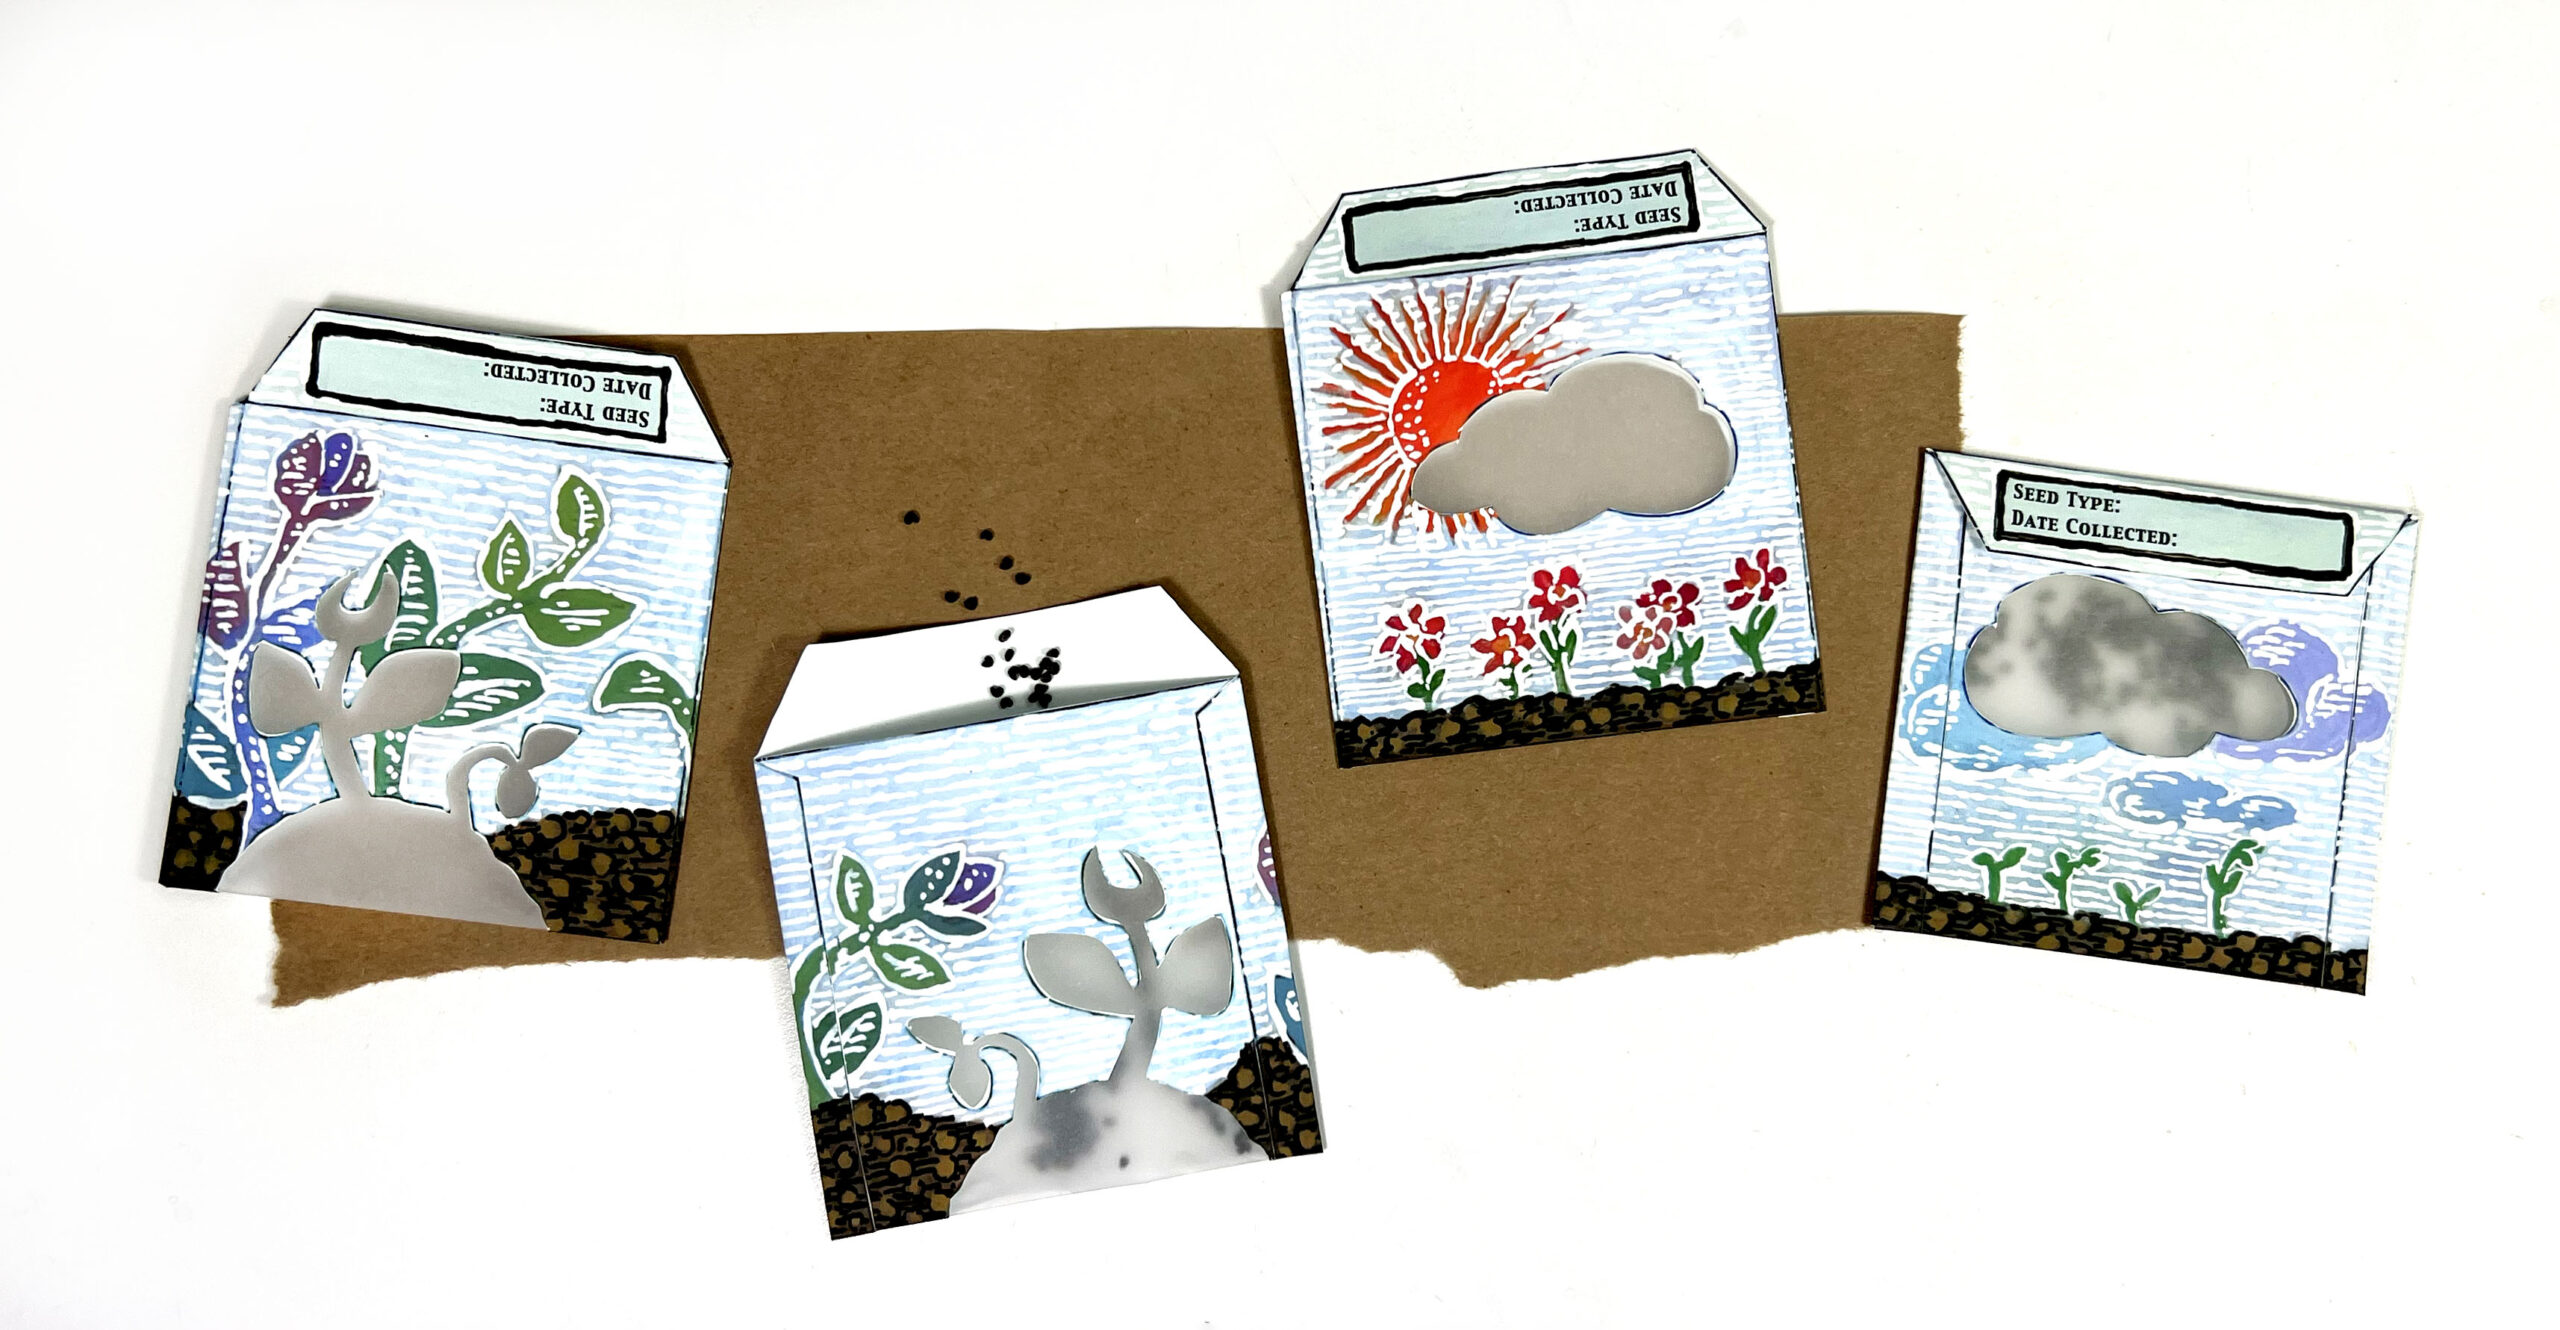 image of 4 handmade paper seed packs with hand painted floral designs on them